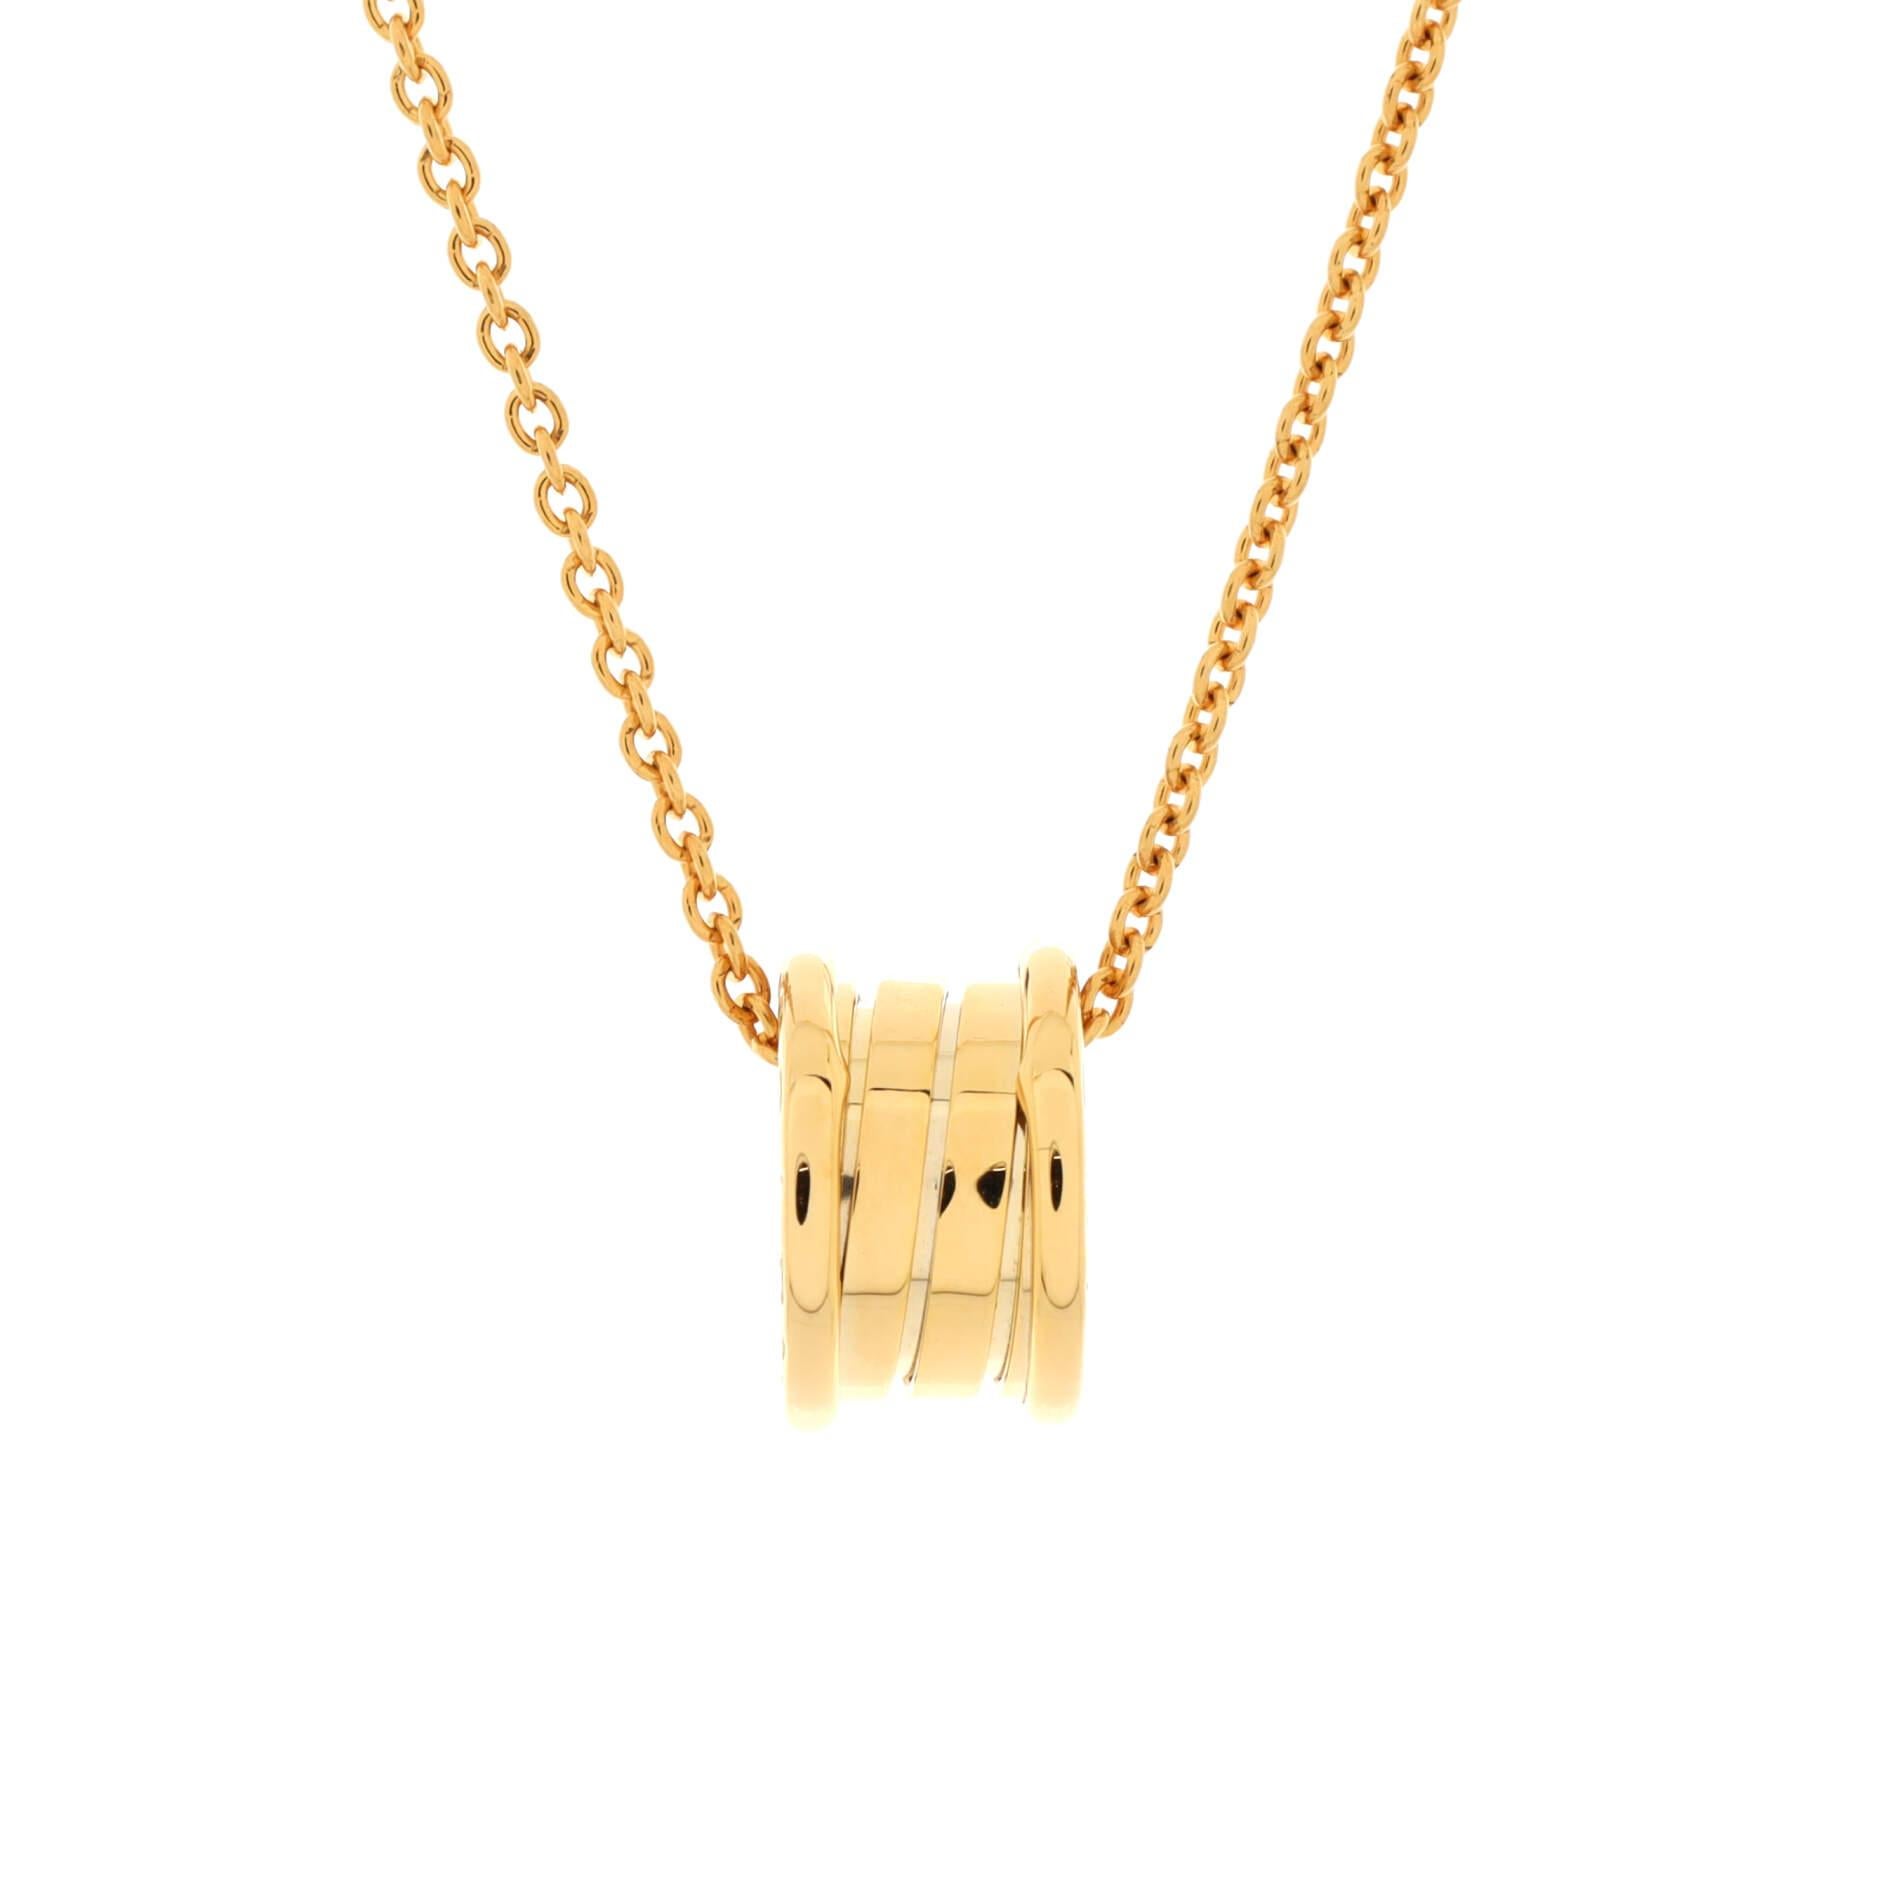 Bvlgari B.Zero1 Pendant Necklace 18K Yellow Gold Small In Good Condition For Sale In New York, NY